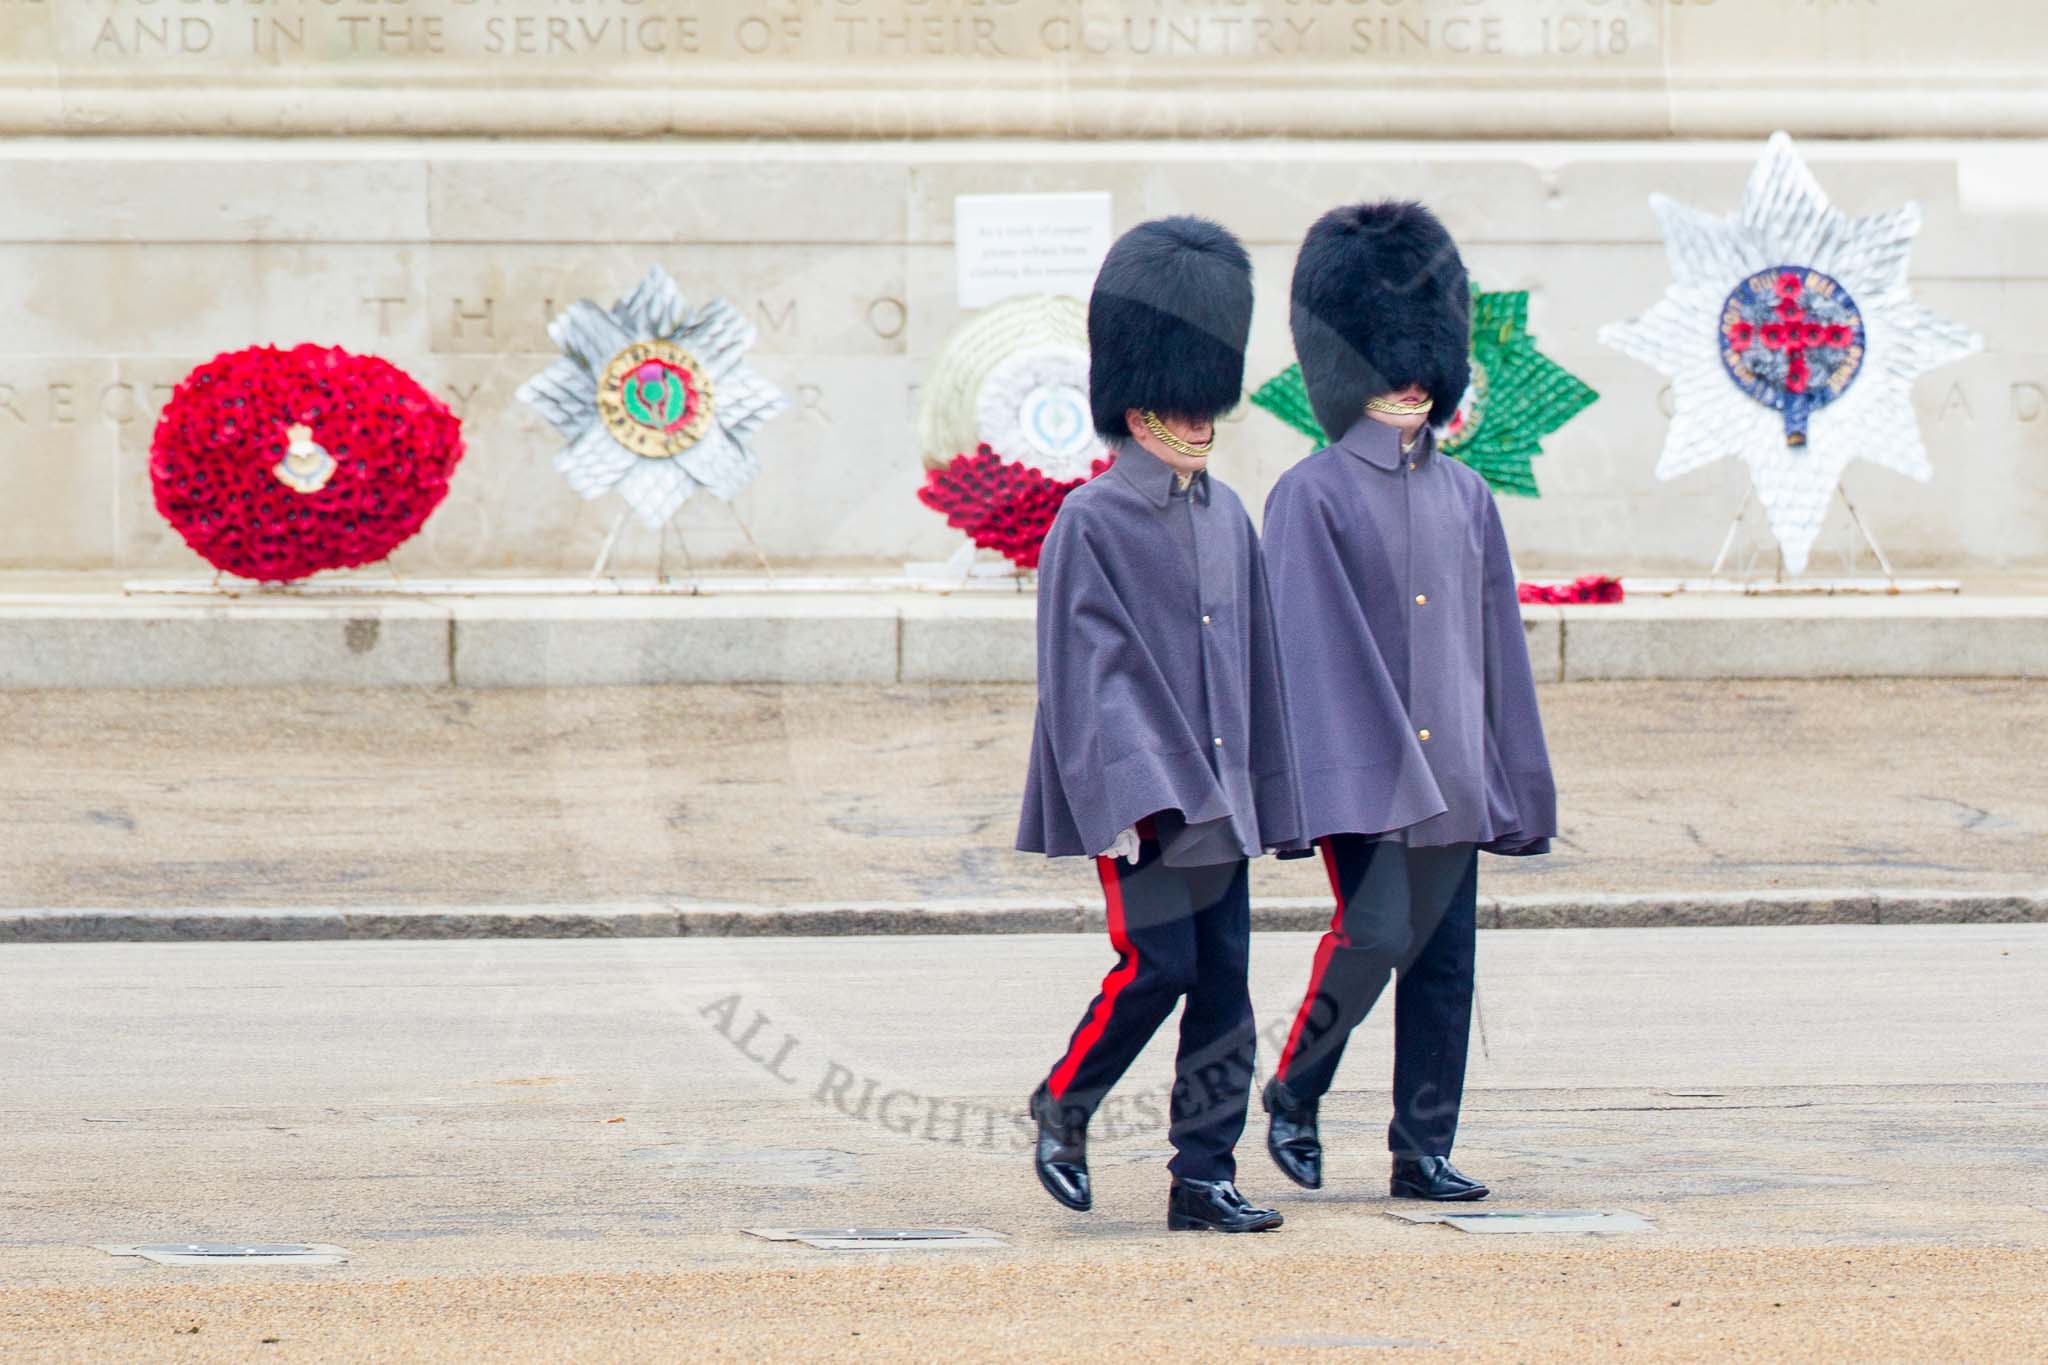 The Colonel's Review 2014.
Horse Guards Parade, Westminster,
London,

United Kingdom,
on 07 June 2014 at 09:49, image #19